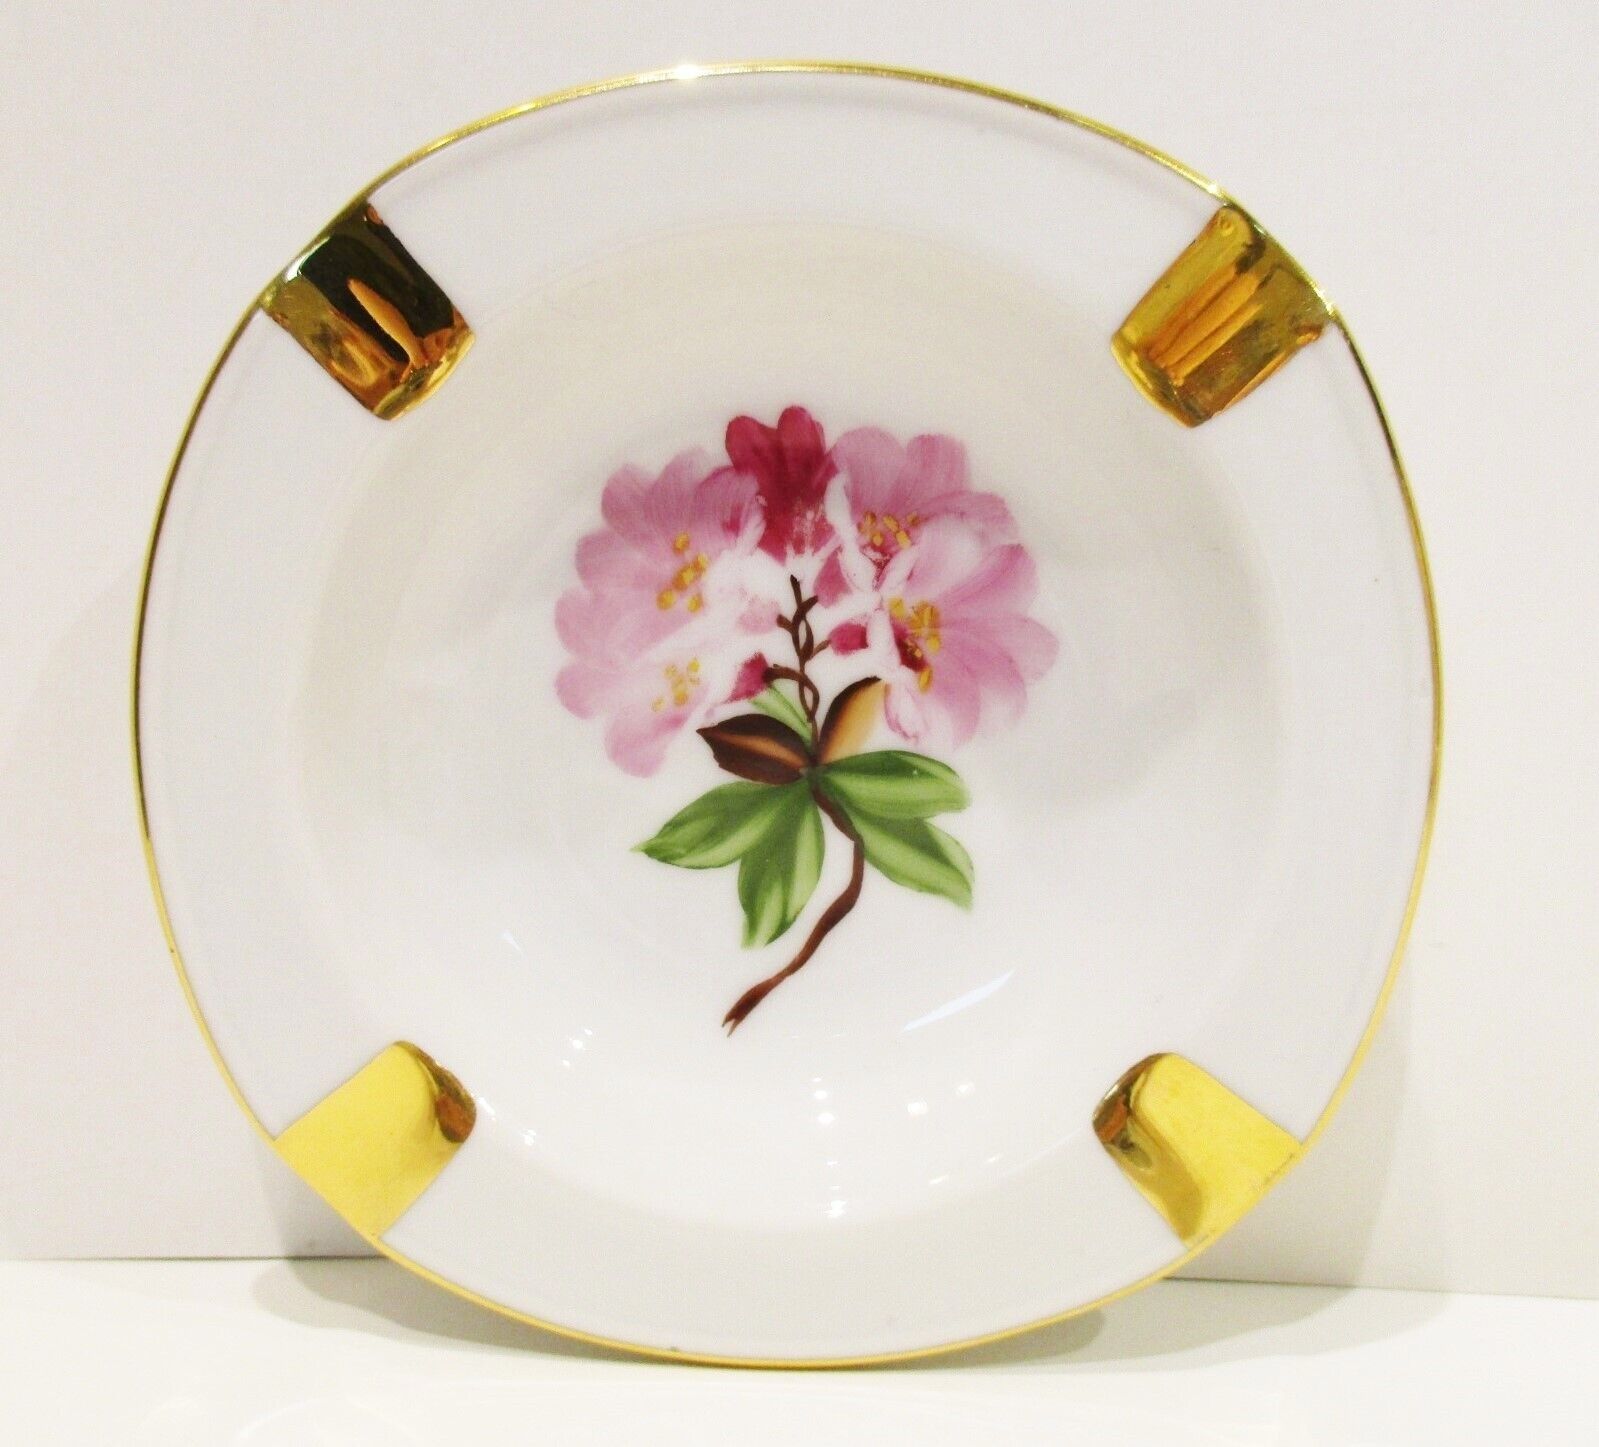 Vintage Germany Ashtray Hand Painted Flowers Floral w/ Gold Accents Hans Worms